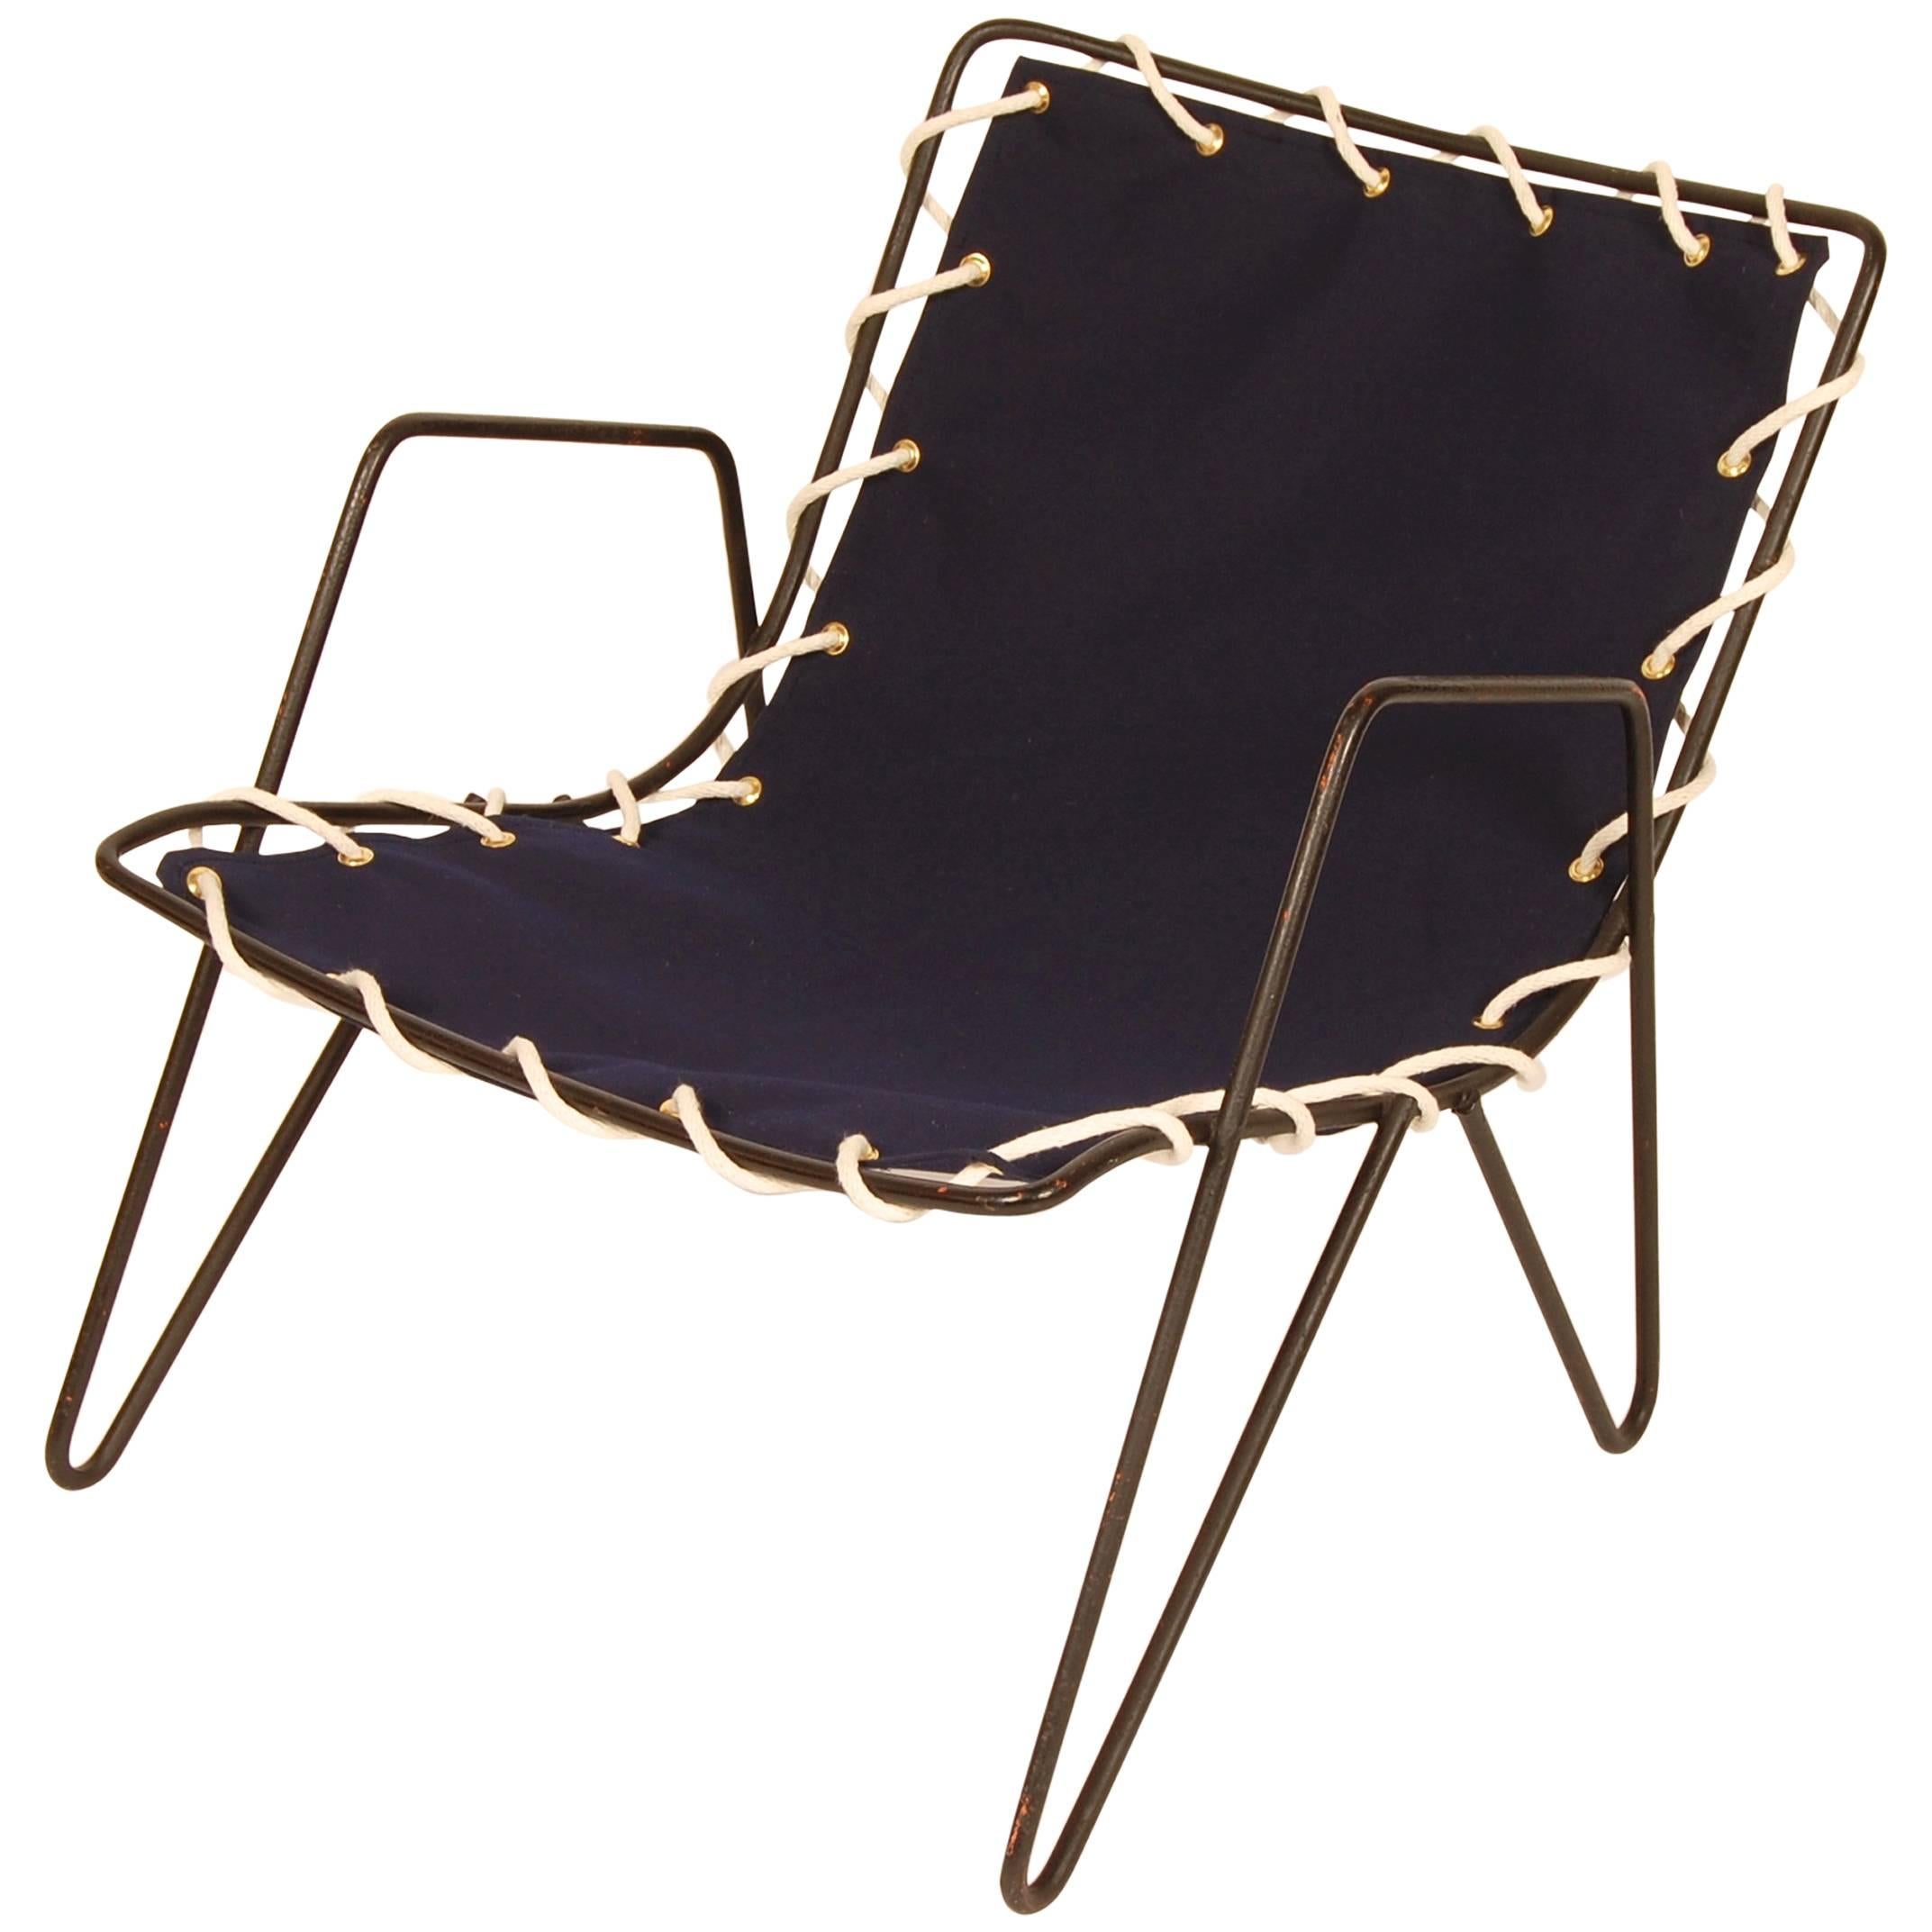 Modernist Iron and Blue Canvas Patio Lounge Chair, 1950s